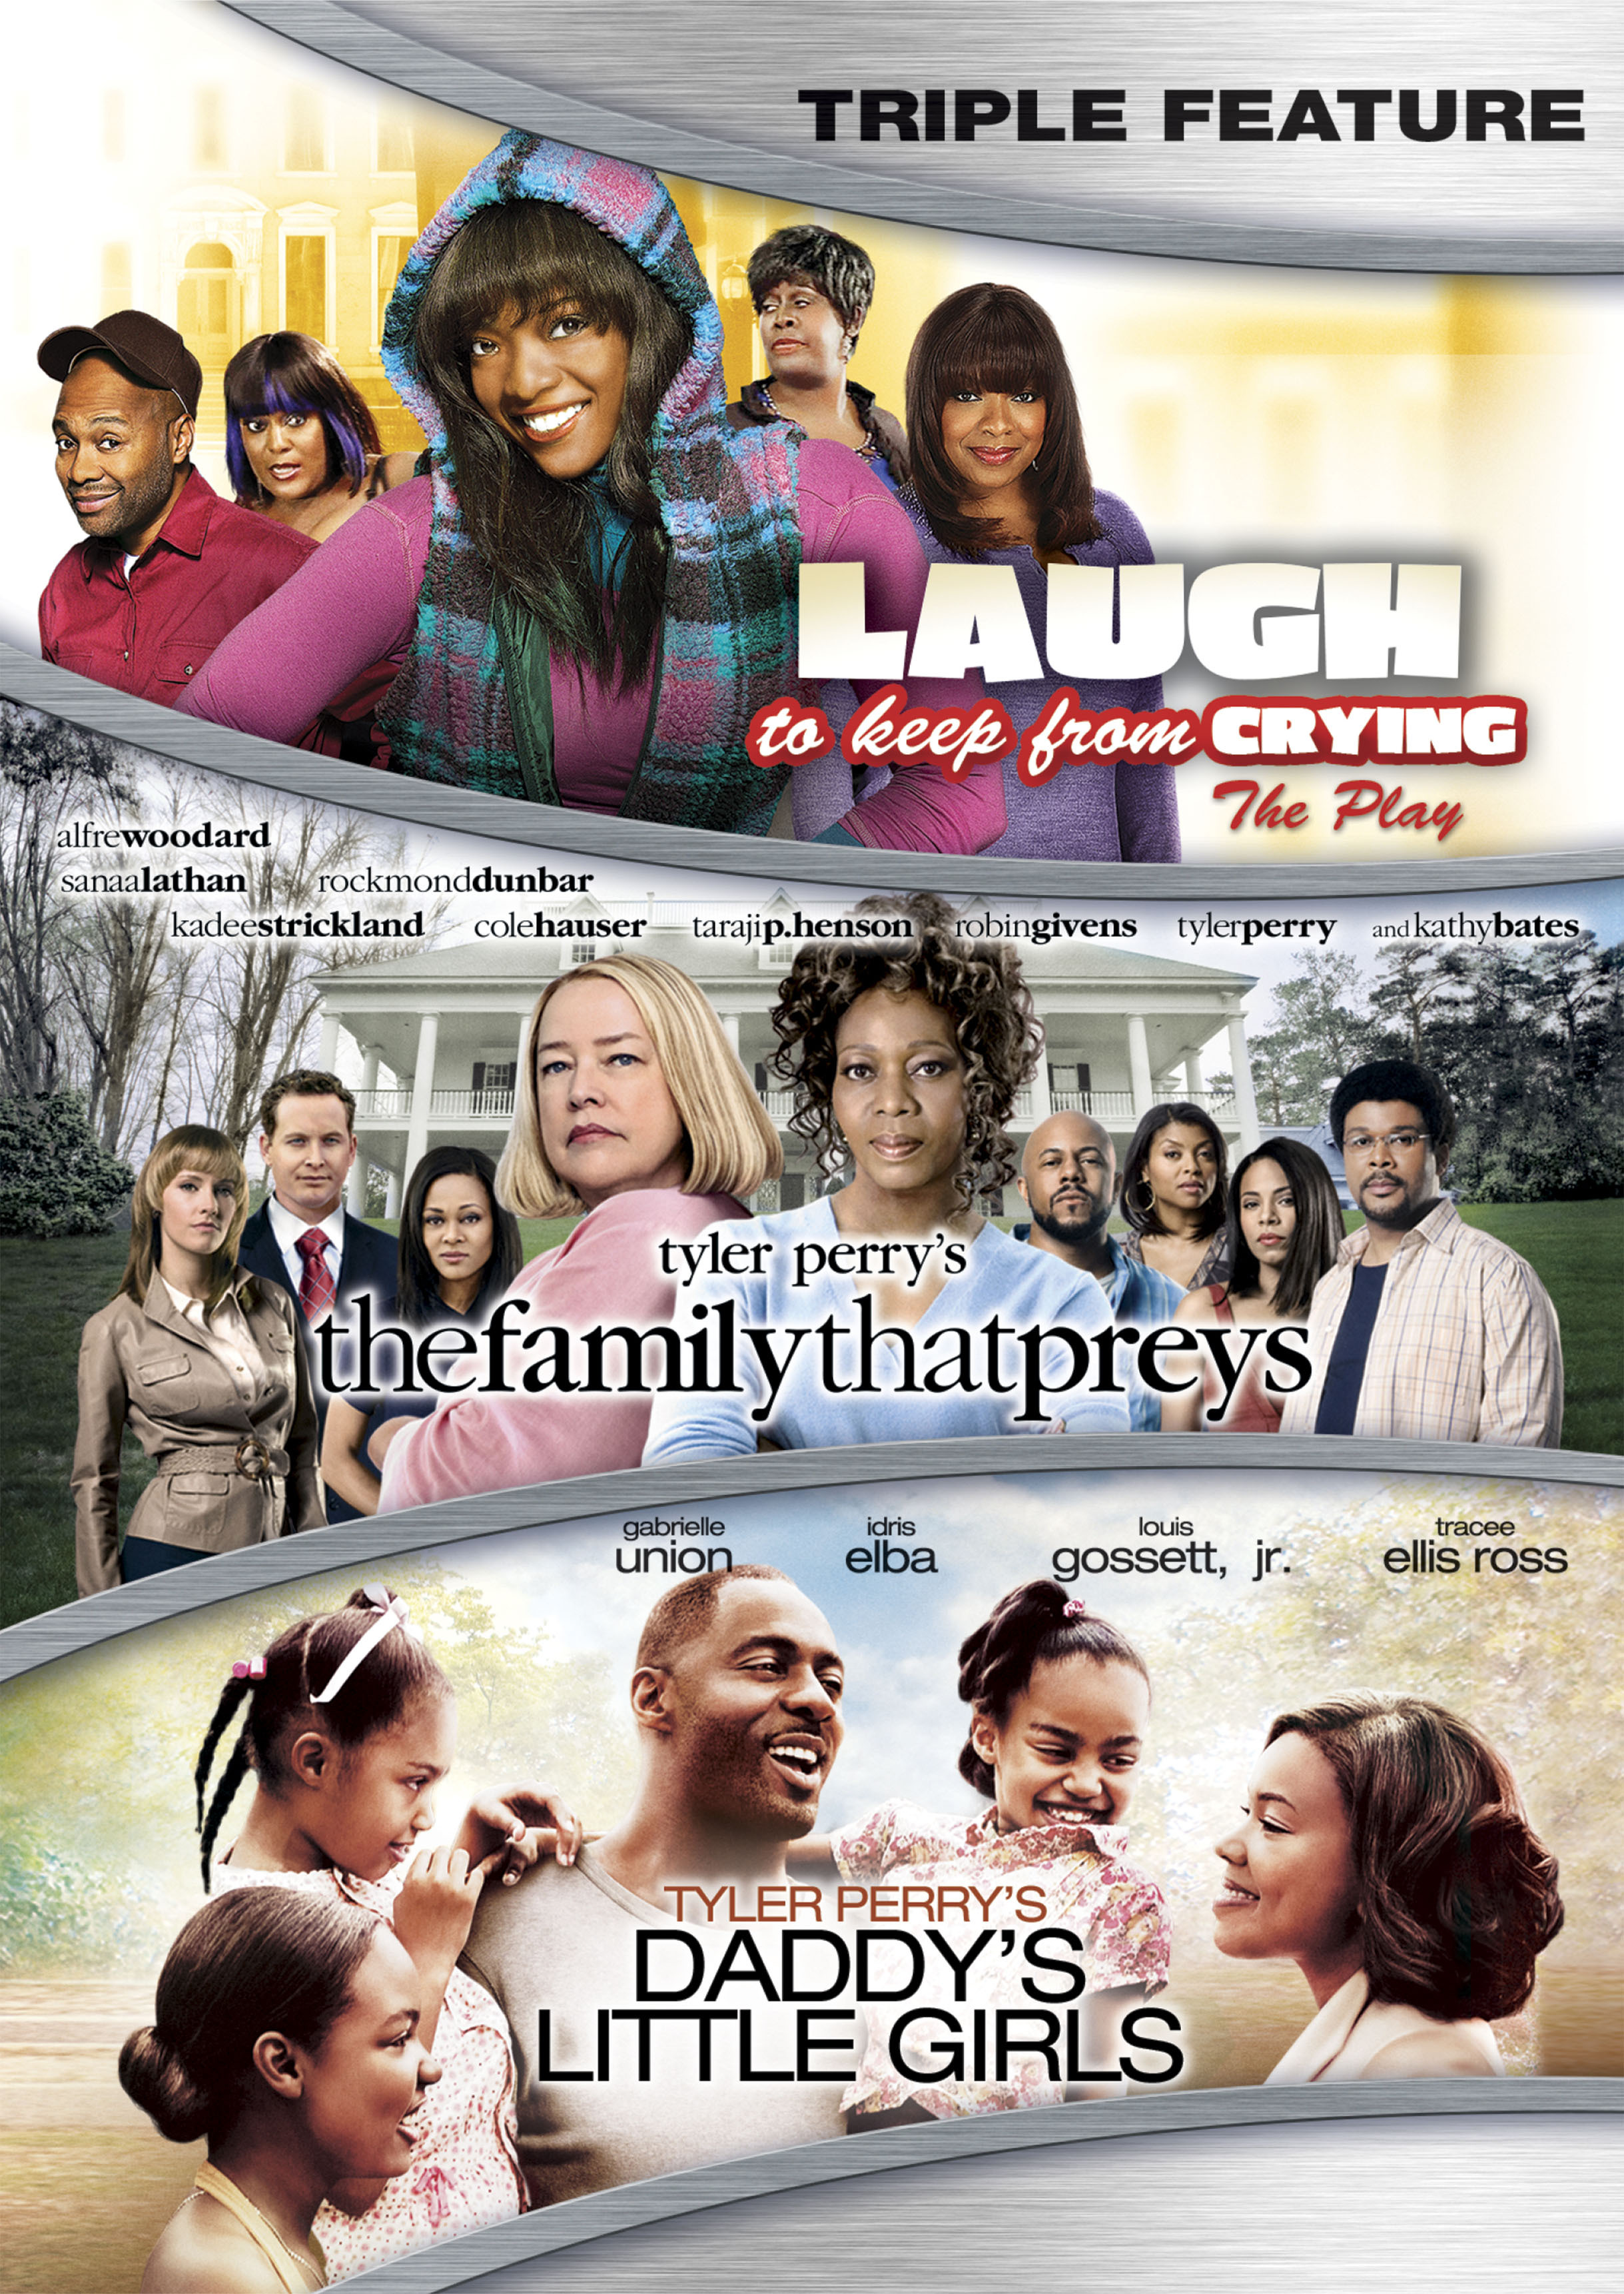 Laught To Keep From Crying/Family That Preys/Daddy's Little Girls - DVD   - Drama Movies On DVD - Movies On GRUV